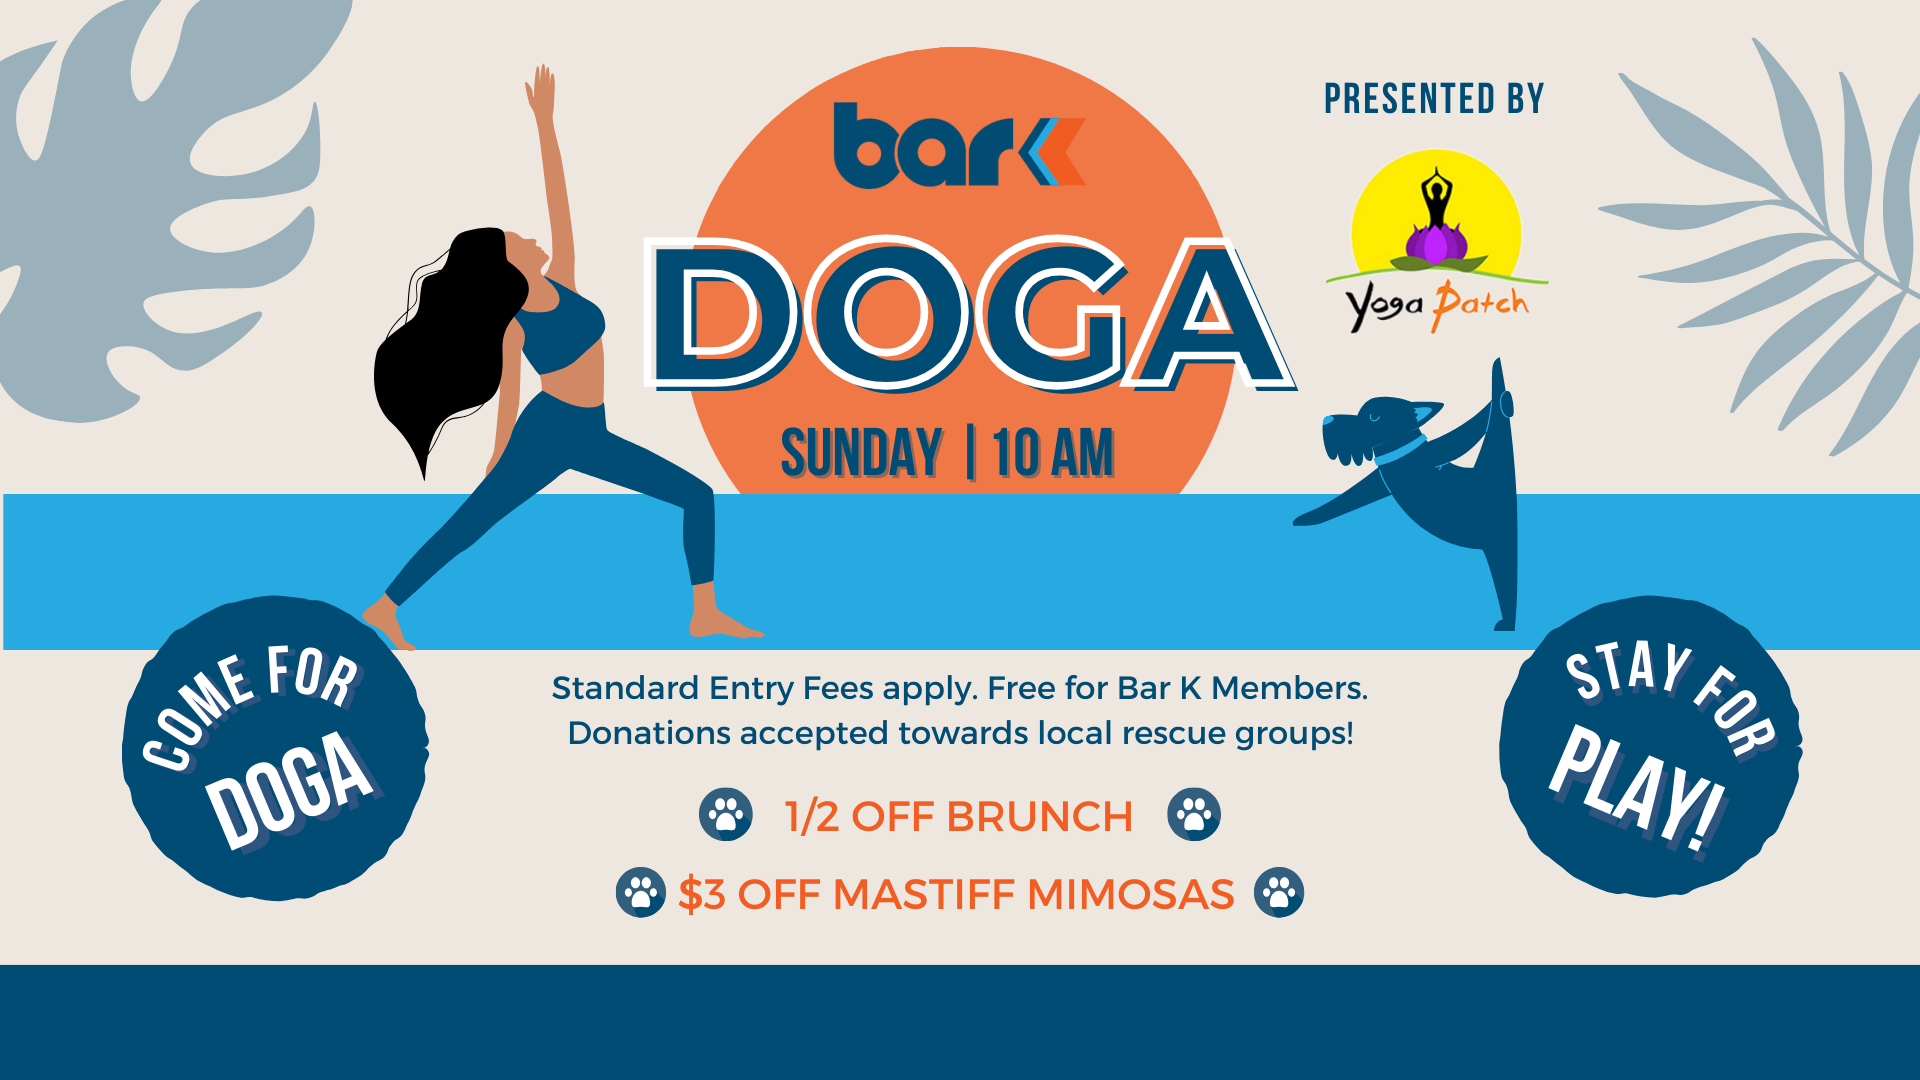 Bar K Doga on sunday at 10AM presented by yoga patch. Standard entry fees apply. Free for Bar K Members. Donations accepted towards local rescue groups! 1/2 off brunch and $3 off mastiff mimosas